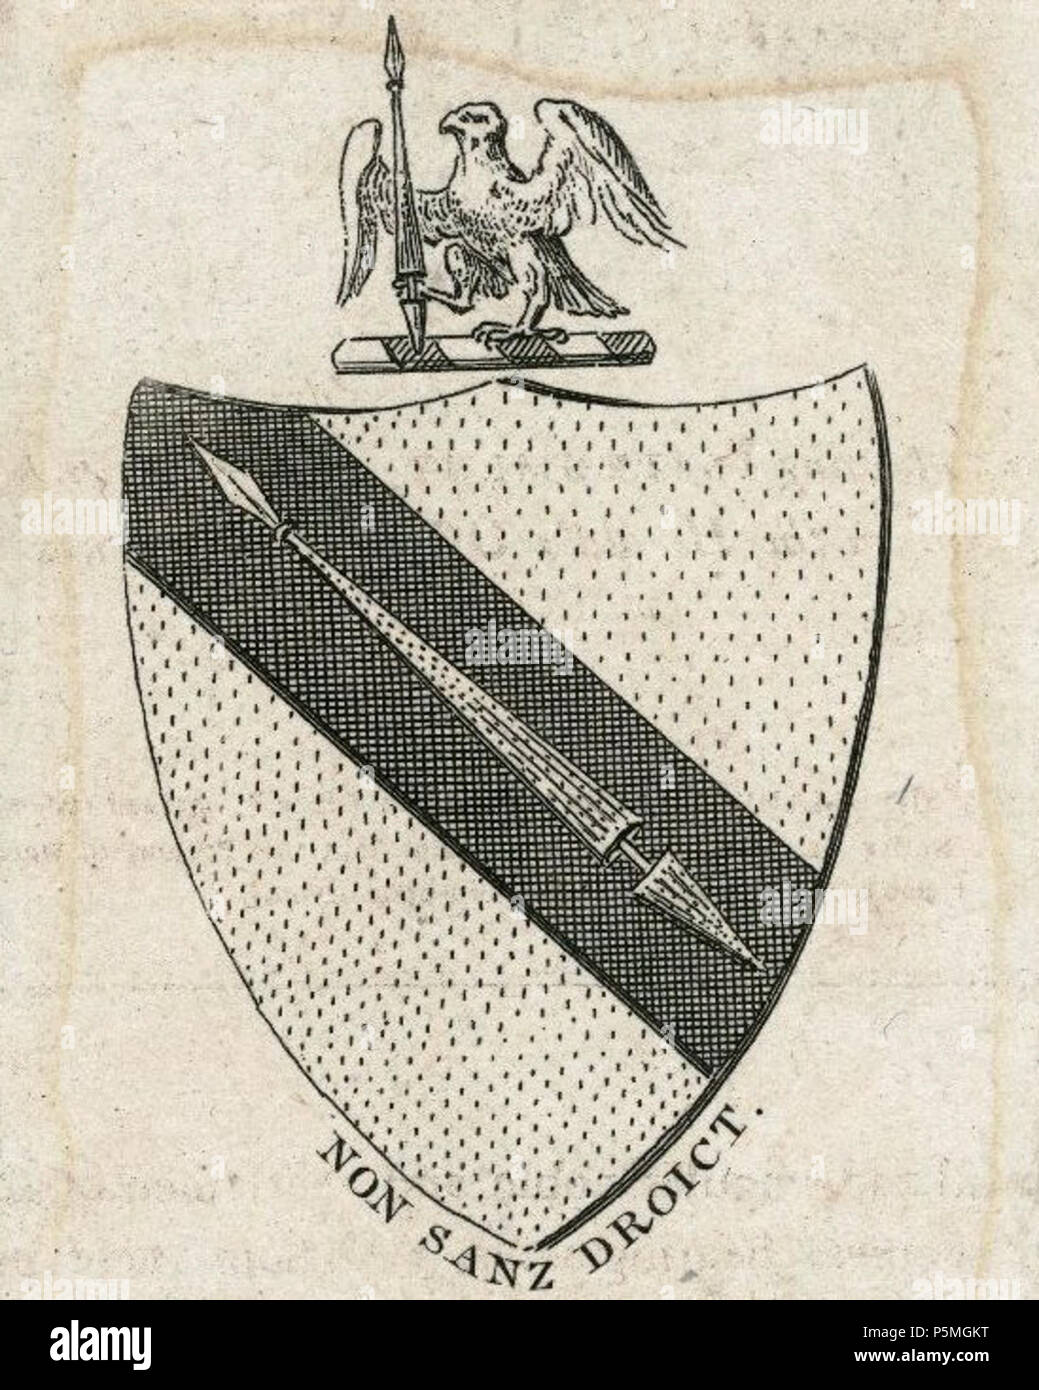 N/A. English: Cropped image of engraved print of Shakespeare's coat of arms, printed for John Bell, London, 1787. Blazon: Or, on a bend sable, a [tilting] spear of the field headed argent.[1] . 3 January 1787. unknown engraver 127 Arms of Shaksperecropped Stock Photo